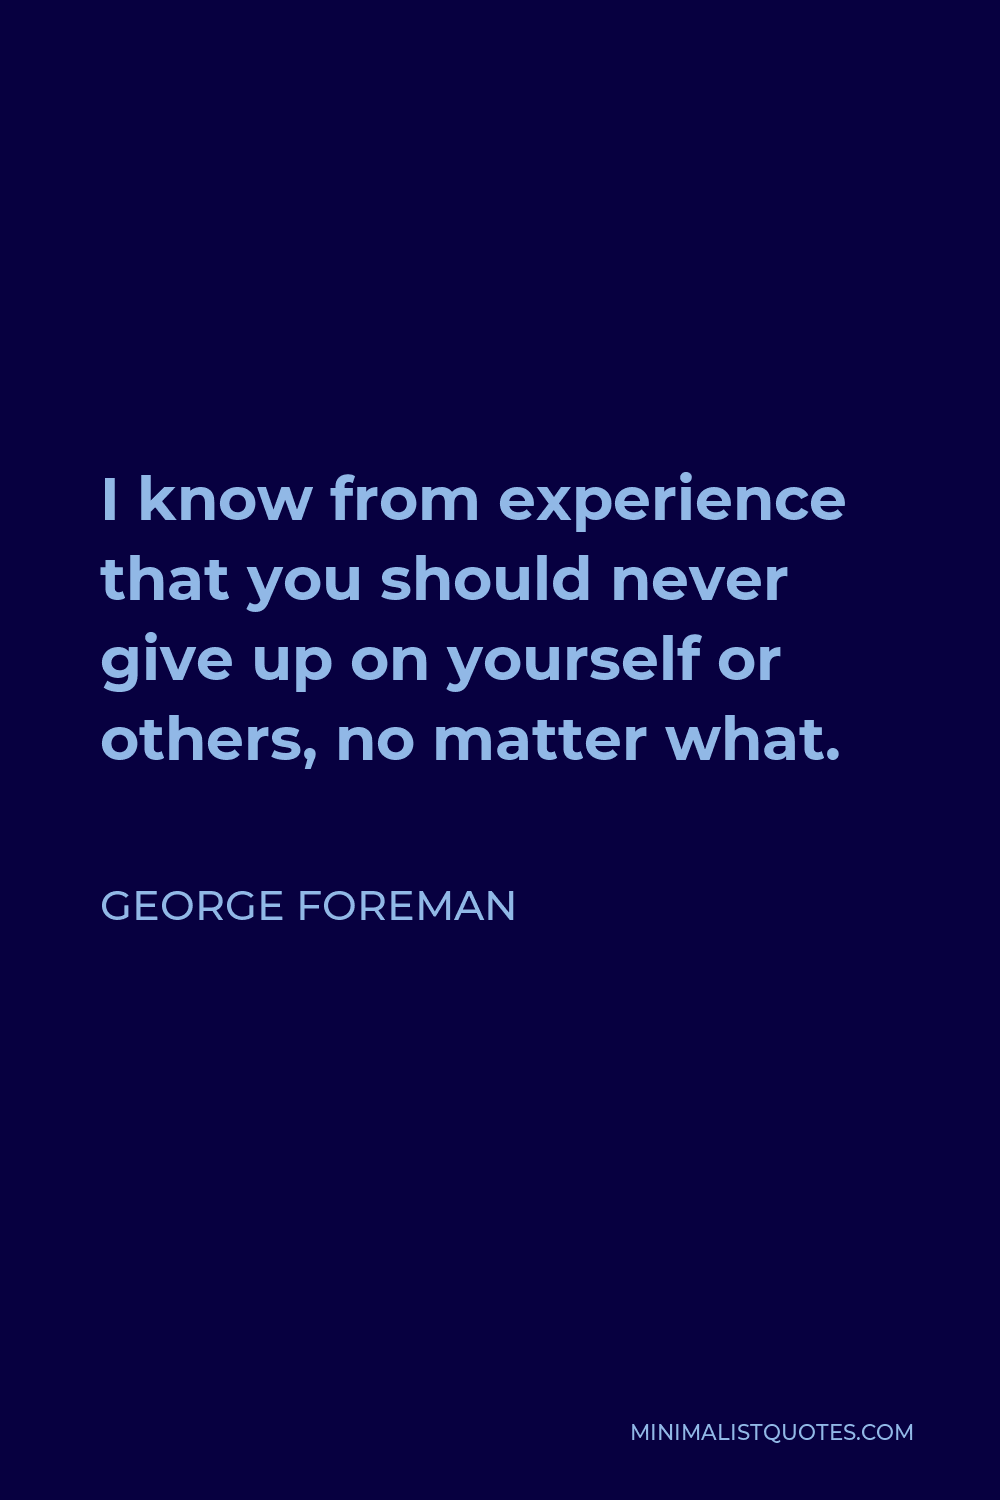 George Foreman Quote - I know from experience that you should never give up on yourself or others, no matter what.